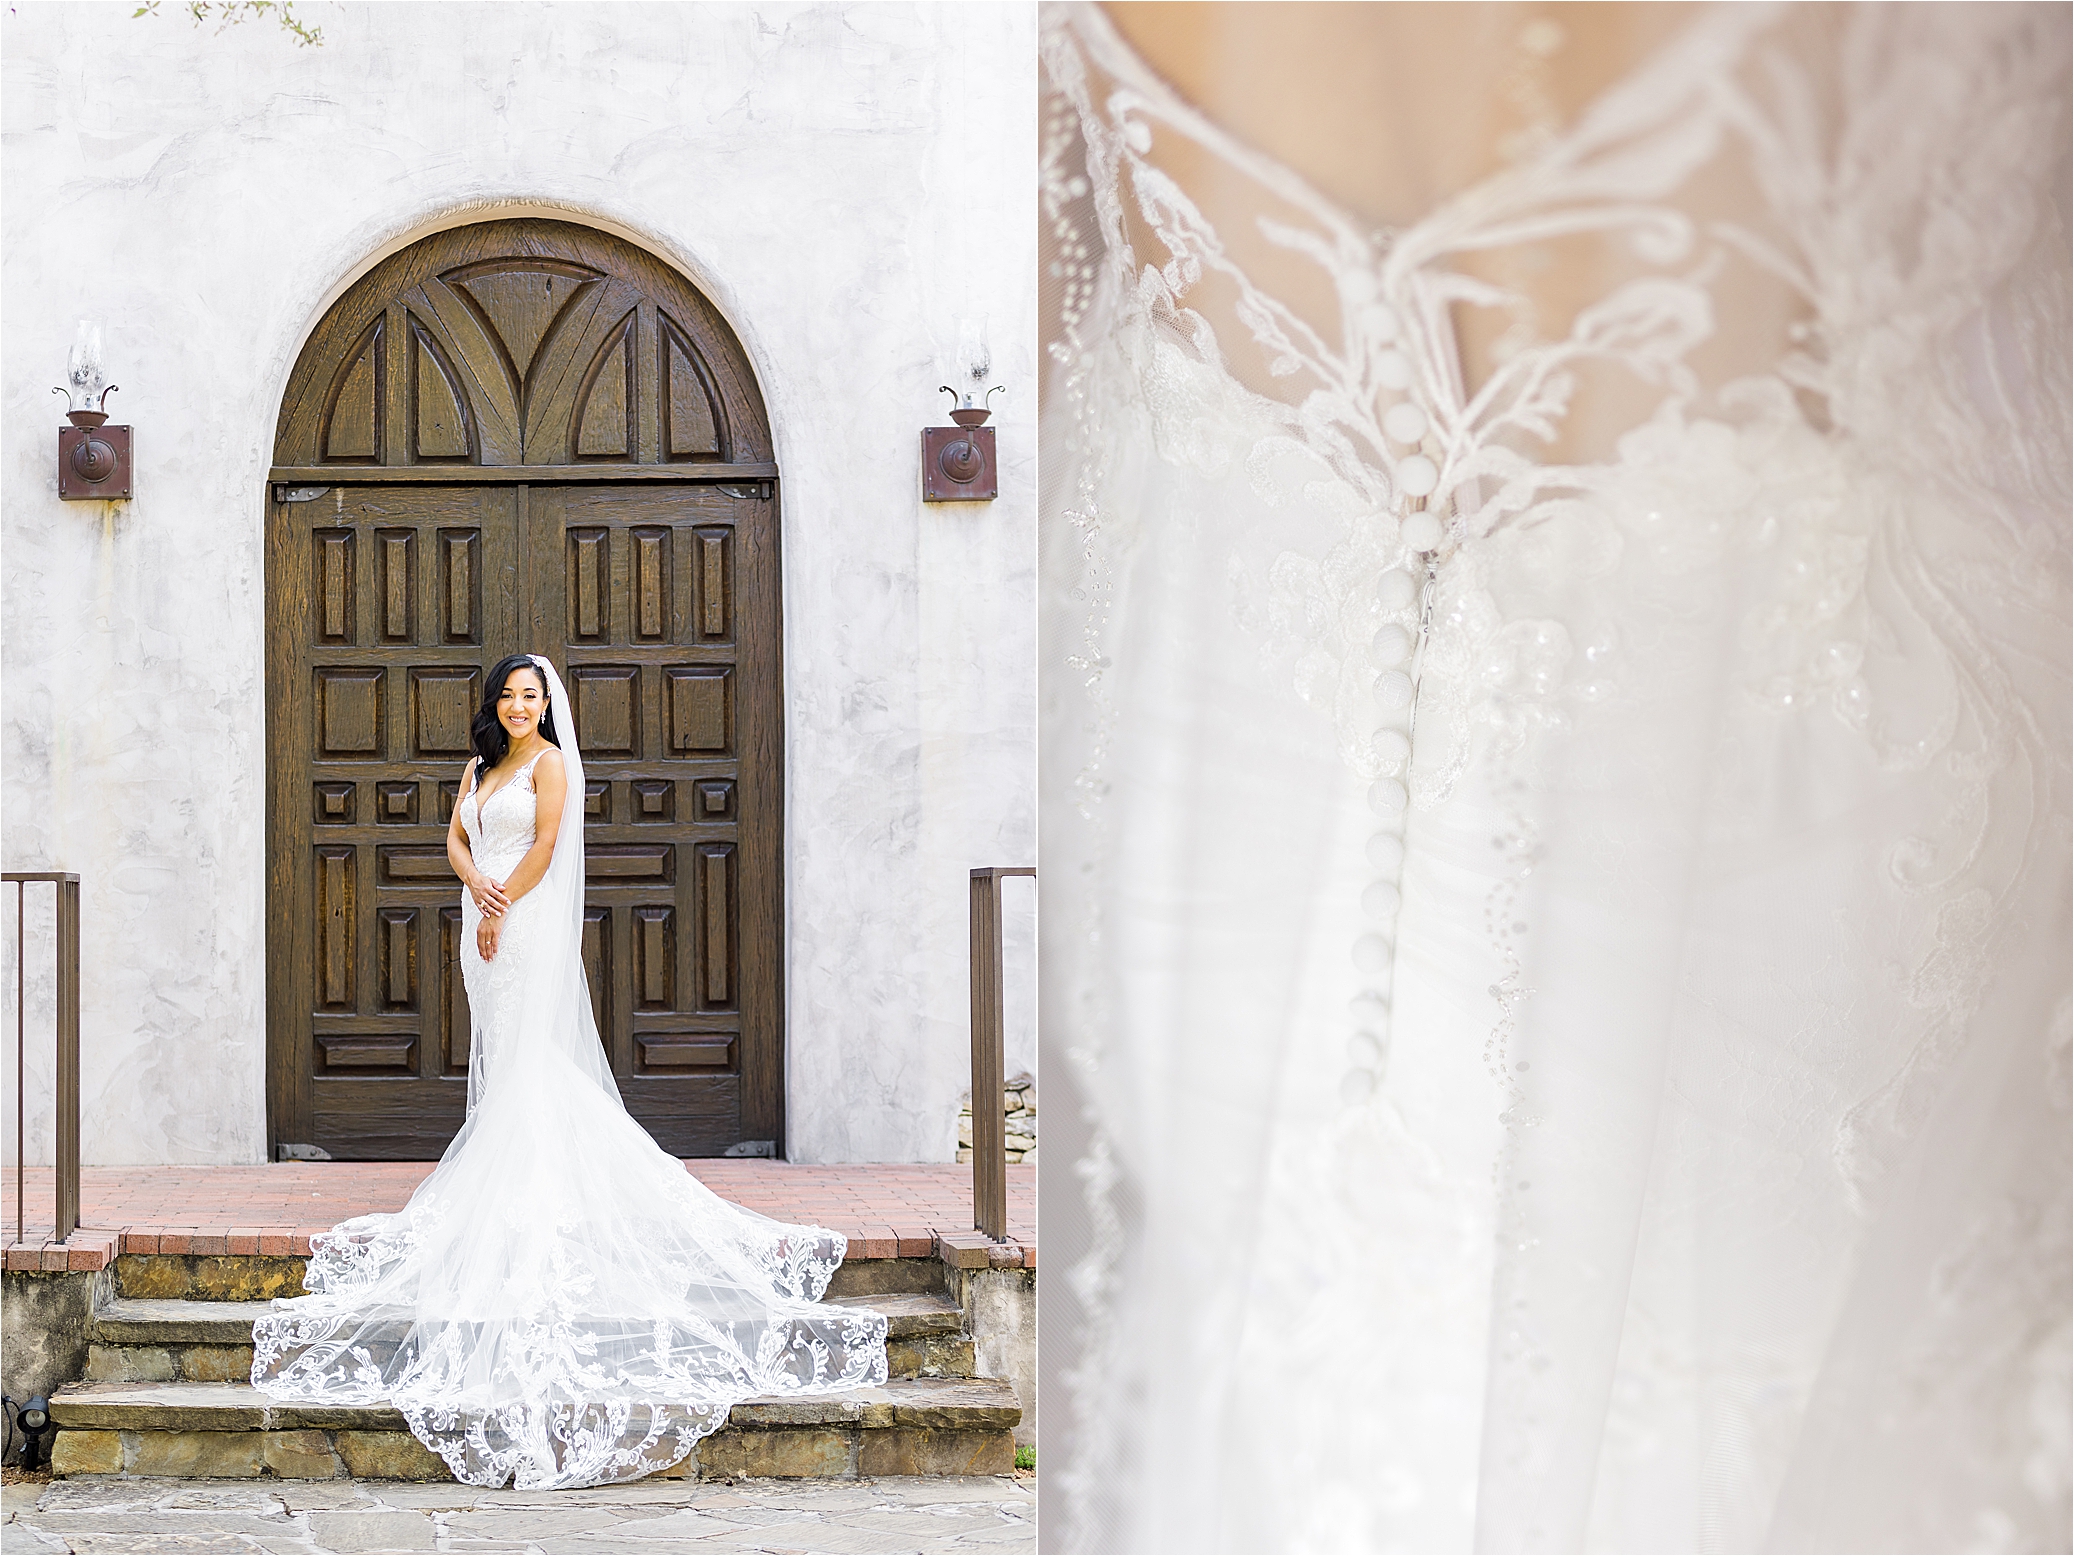  A Bride stands at the top of the stairs as her dress covers the staircase in front of a large, brown door at Lost Mission in San Antonio, Texas for her Hill Country wedding